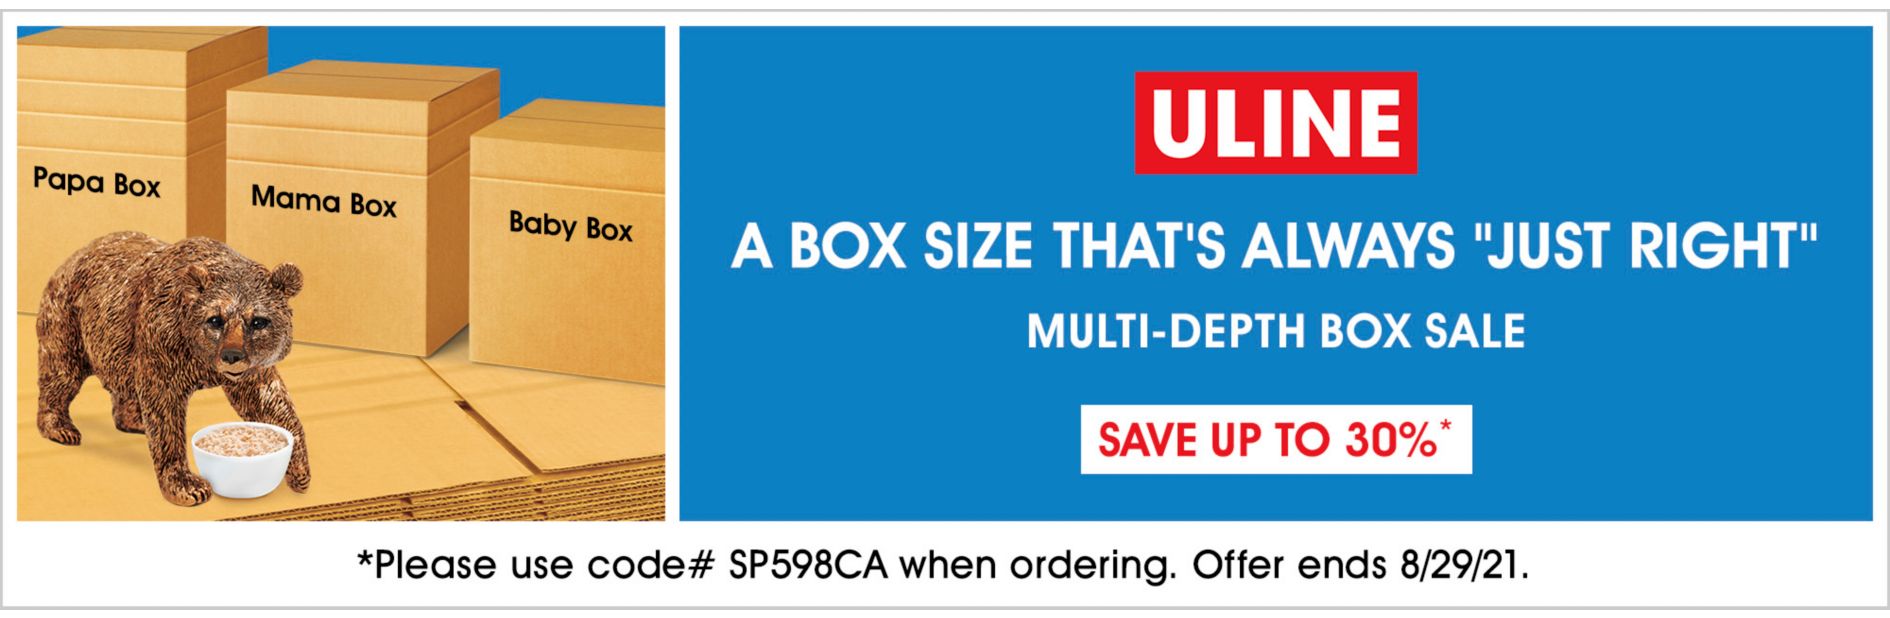 SP598CA Multi-Depth Box Sale, Save up to 30%, Use code SP598CA, Offer ends 8/29/21